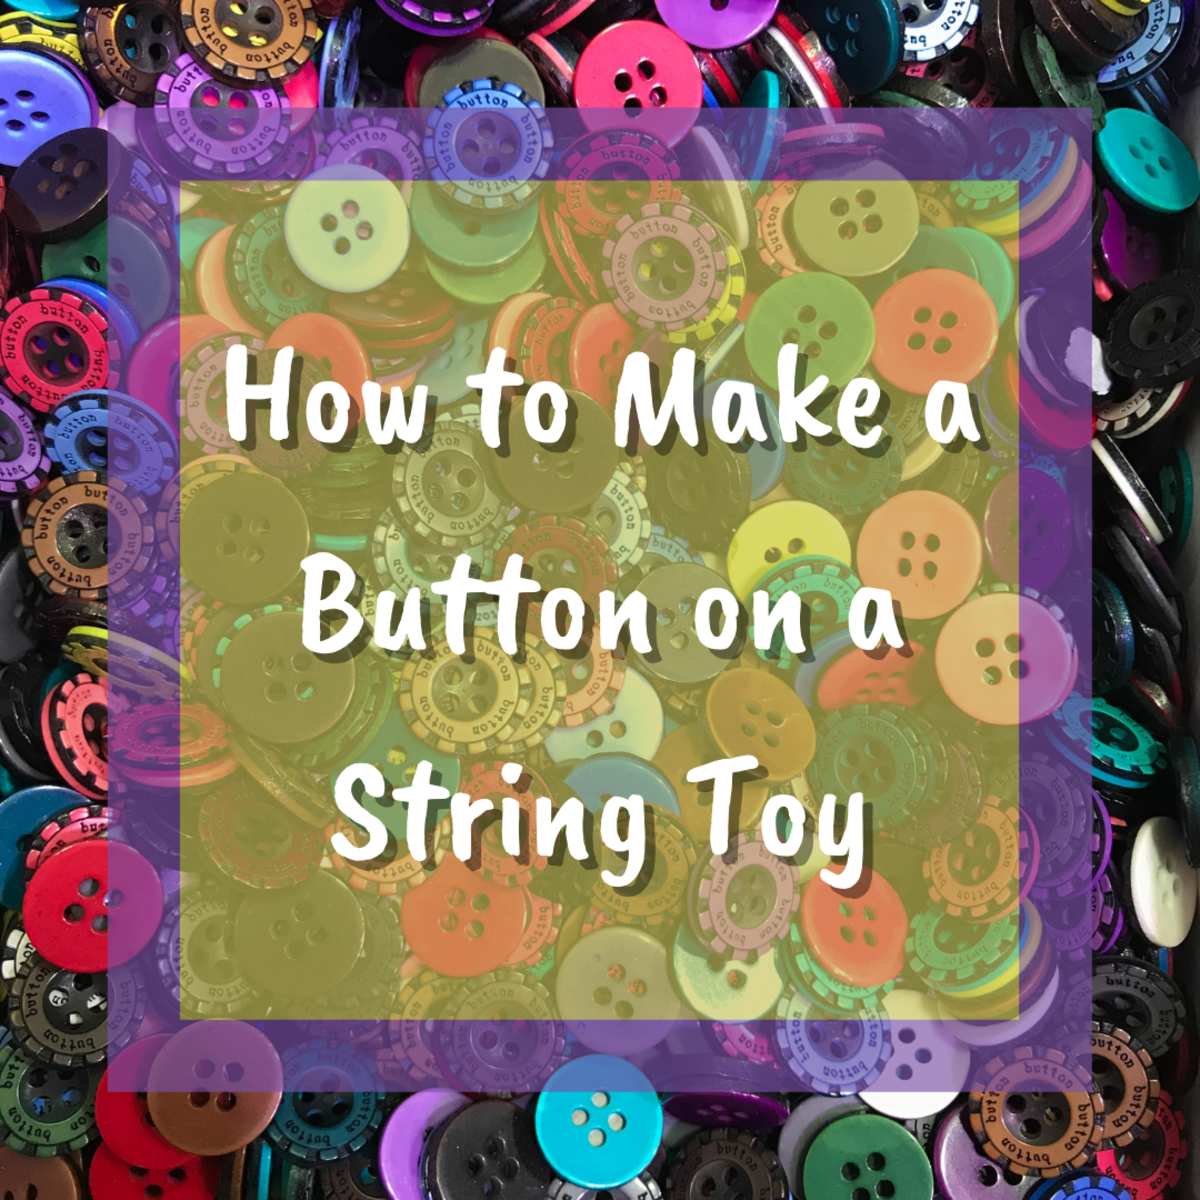 Learn how to create the simple and fun button on a string toy for children!